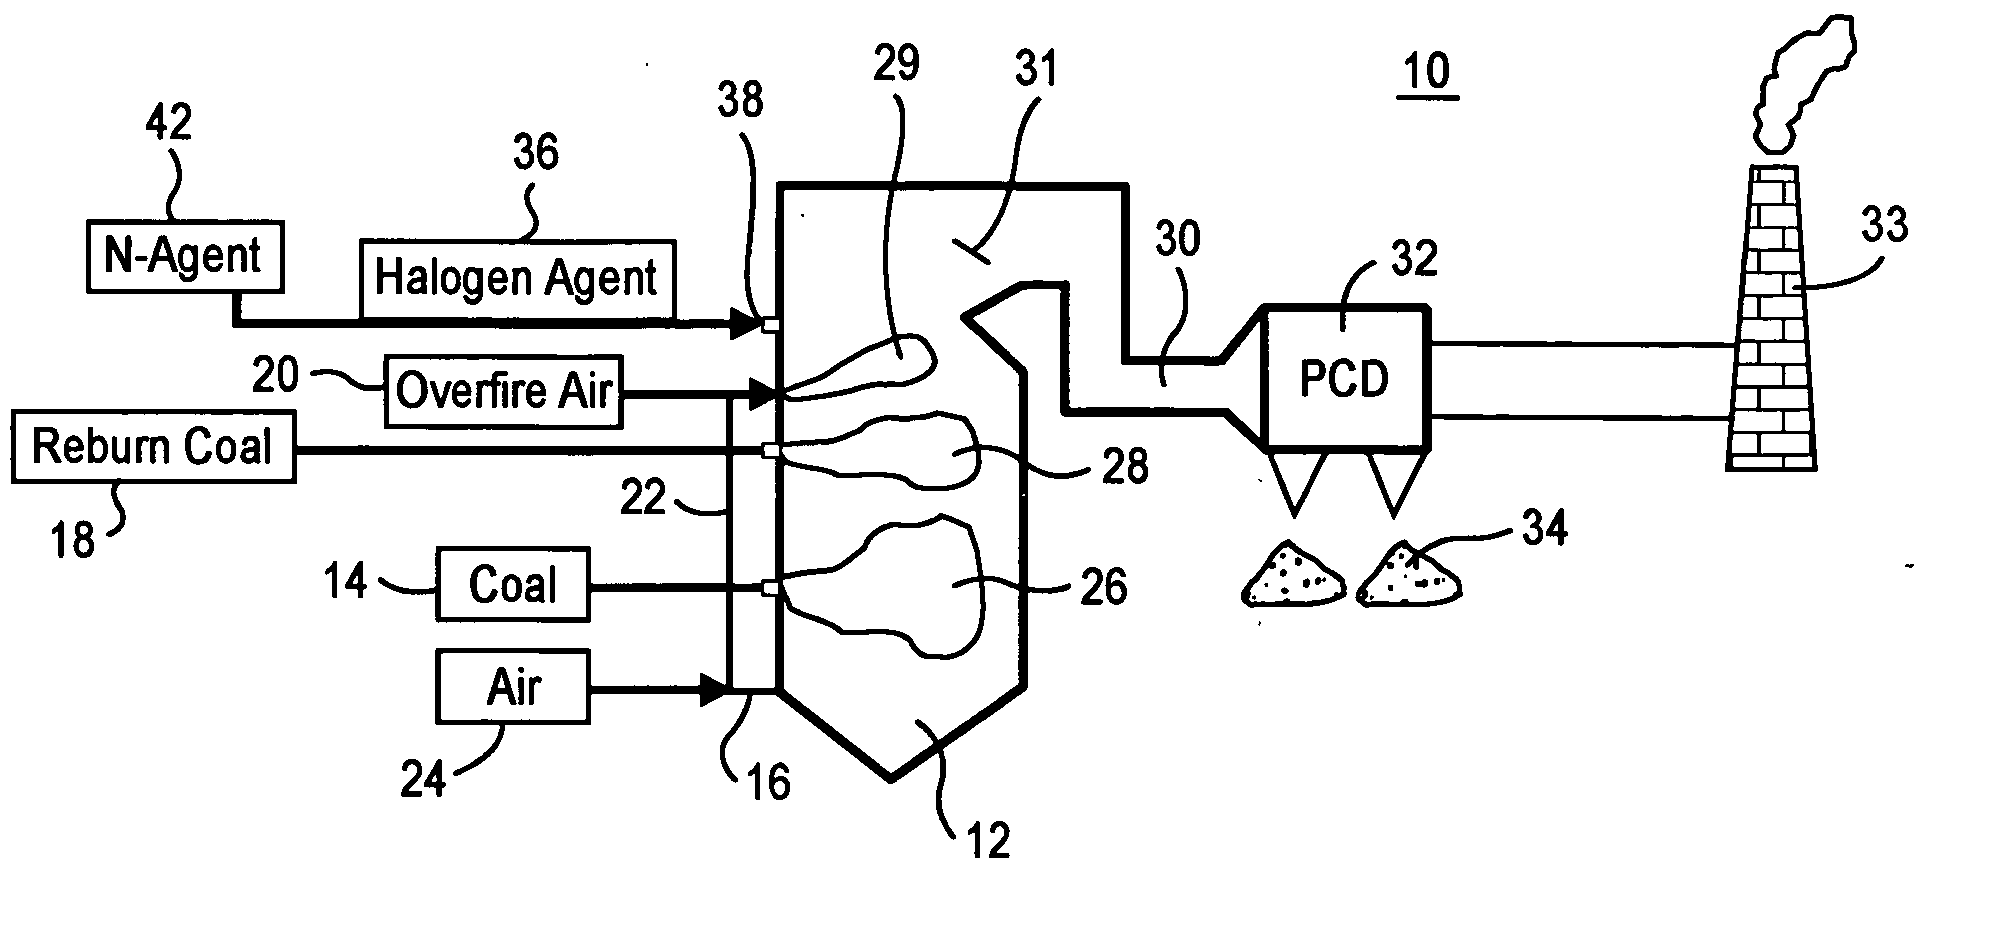 Method and system for removal of NOx and mercury emissions from coal combustion